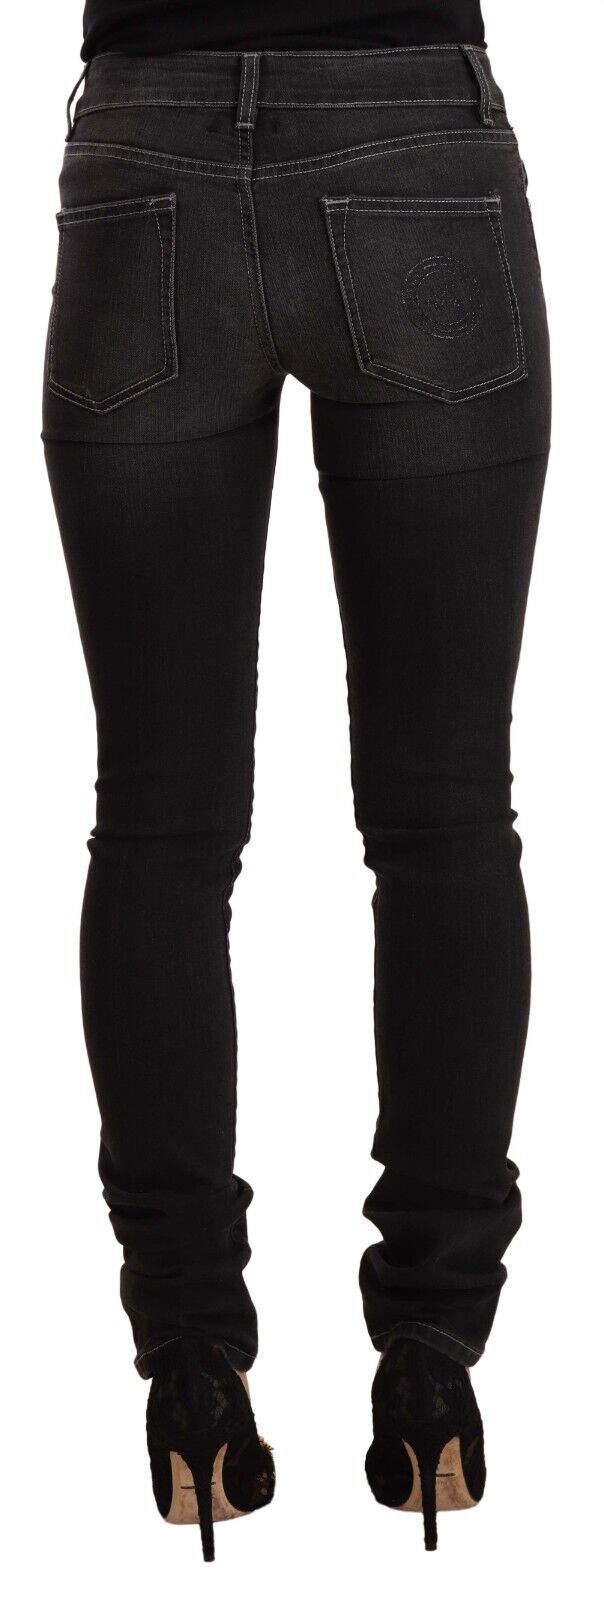 Chic Black Washed Slim Fit Mid Waist Jeans